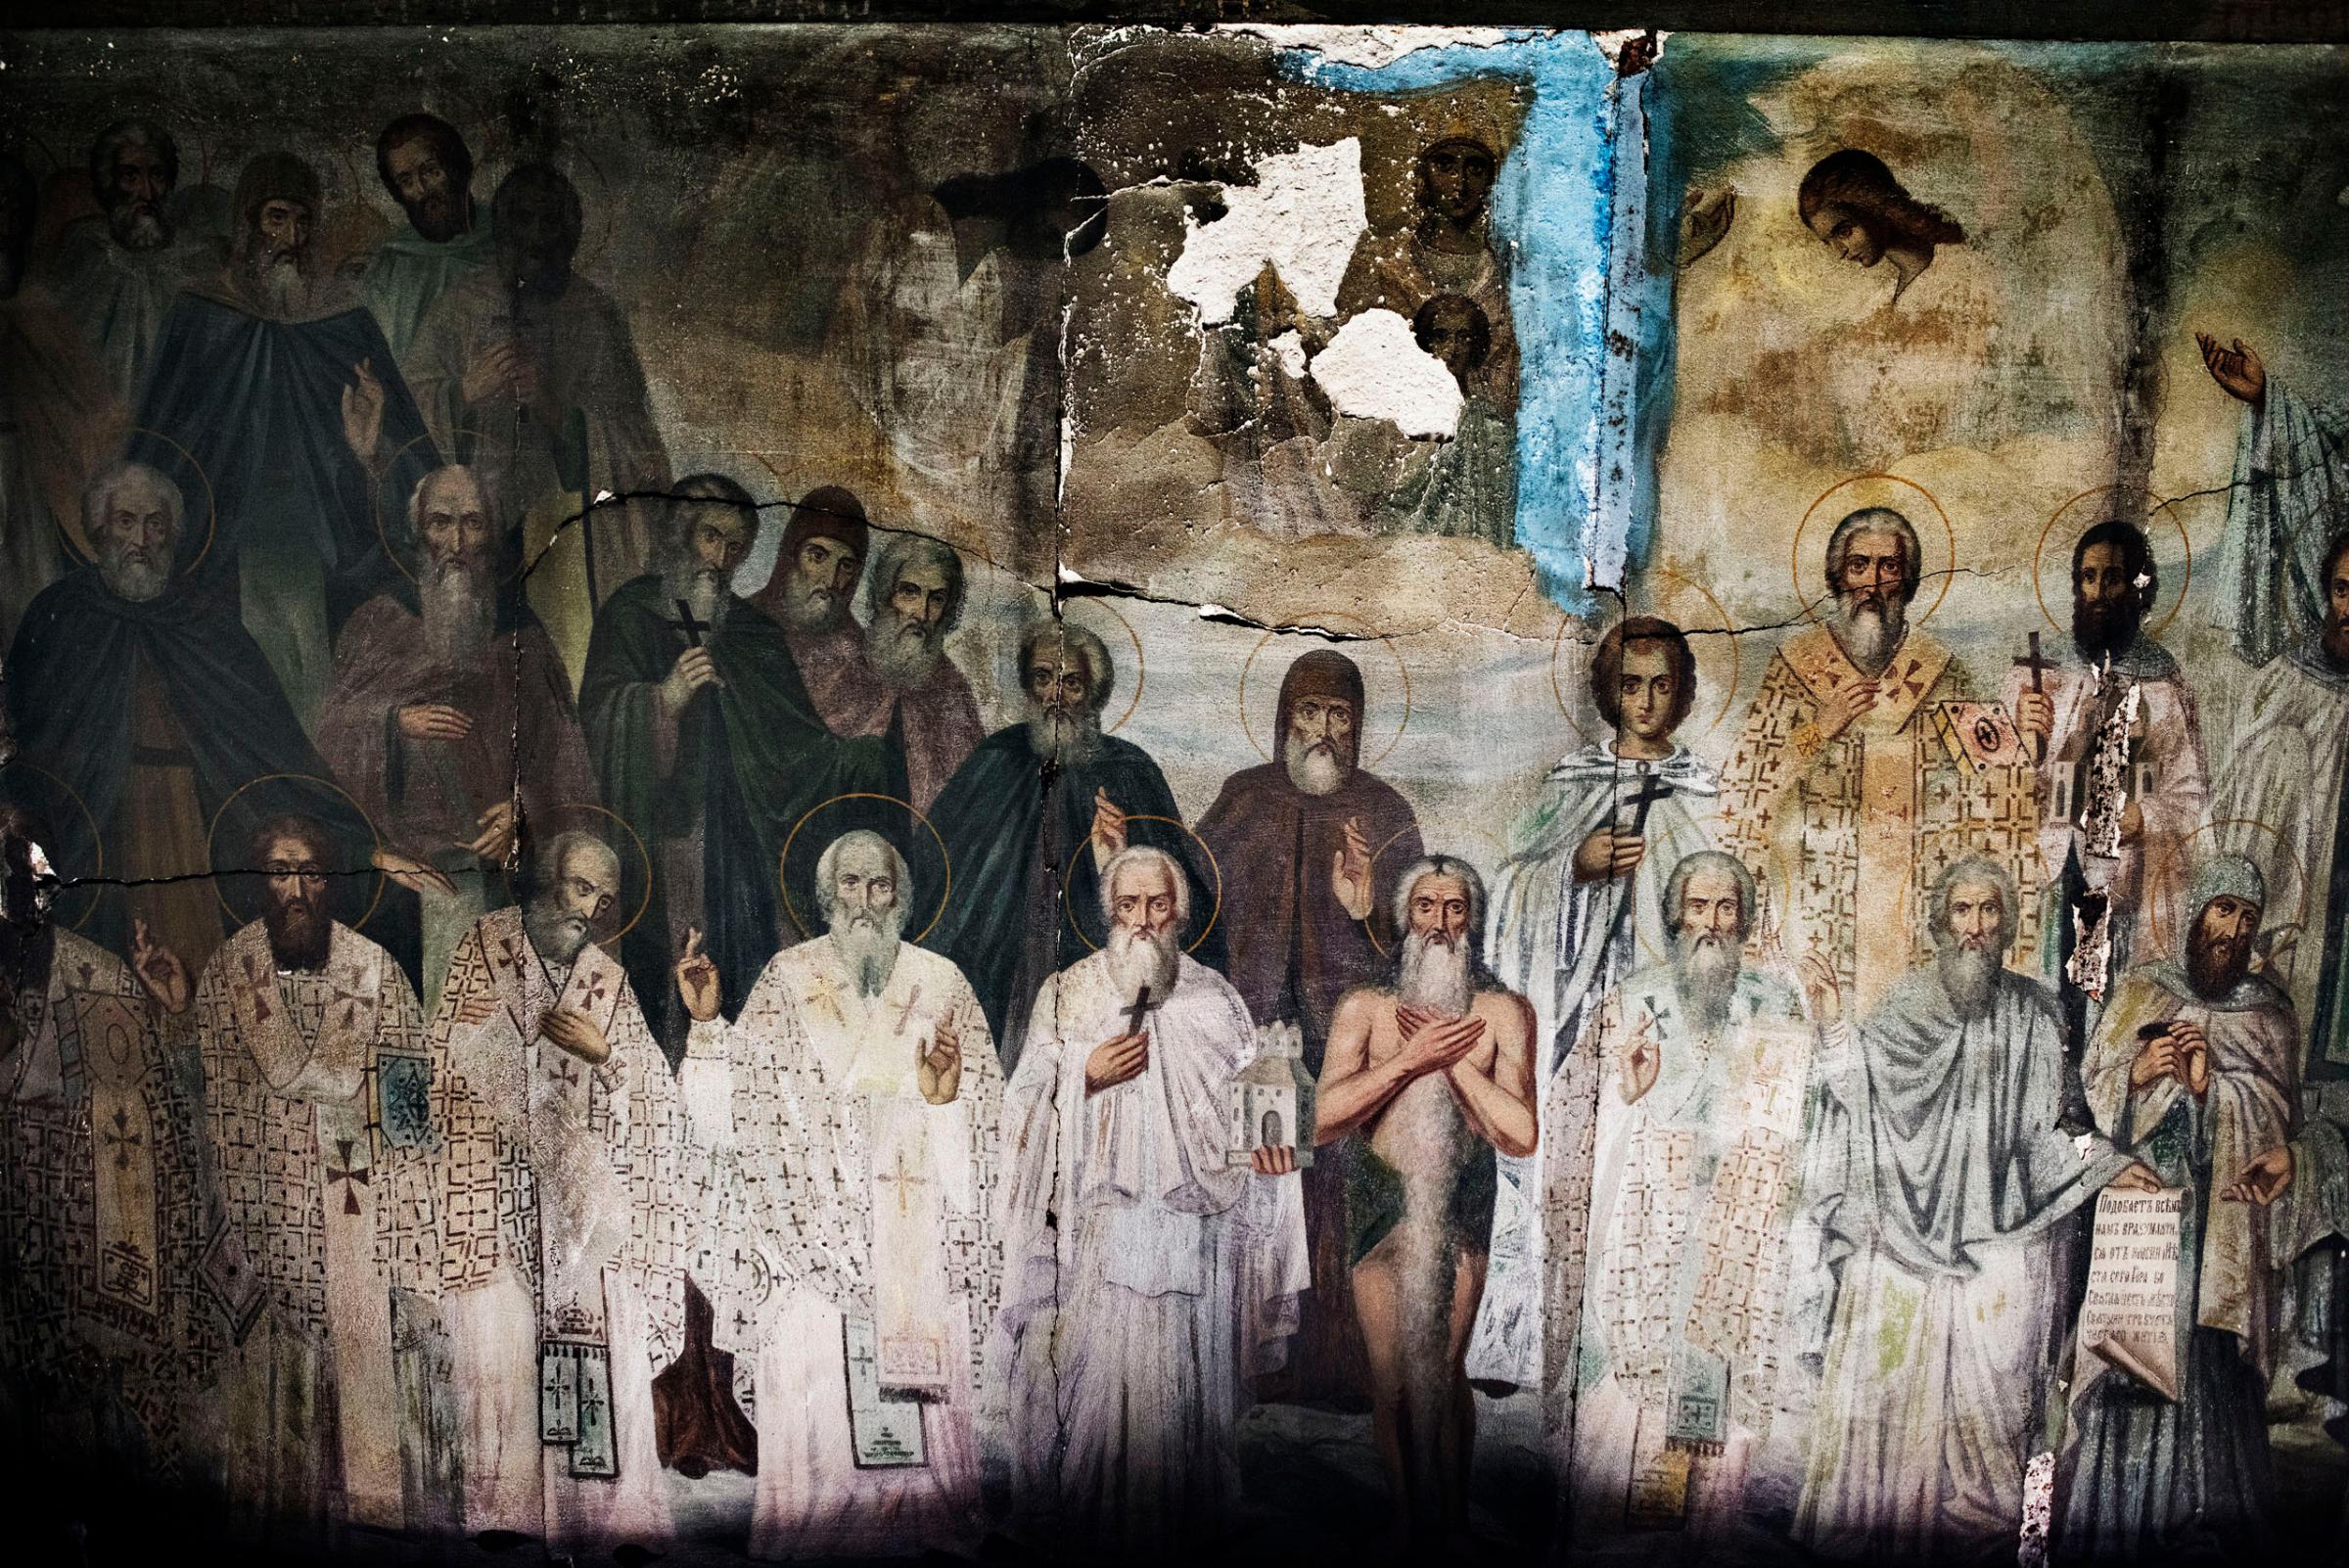 A fresco depicting saints of the Orthodox Church inside the Skete, the monastic community, of St. Andrew, near Karyes, the capital of the of Mount Athos, in northern Greece, May 27, 2016.